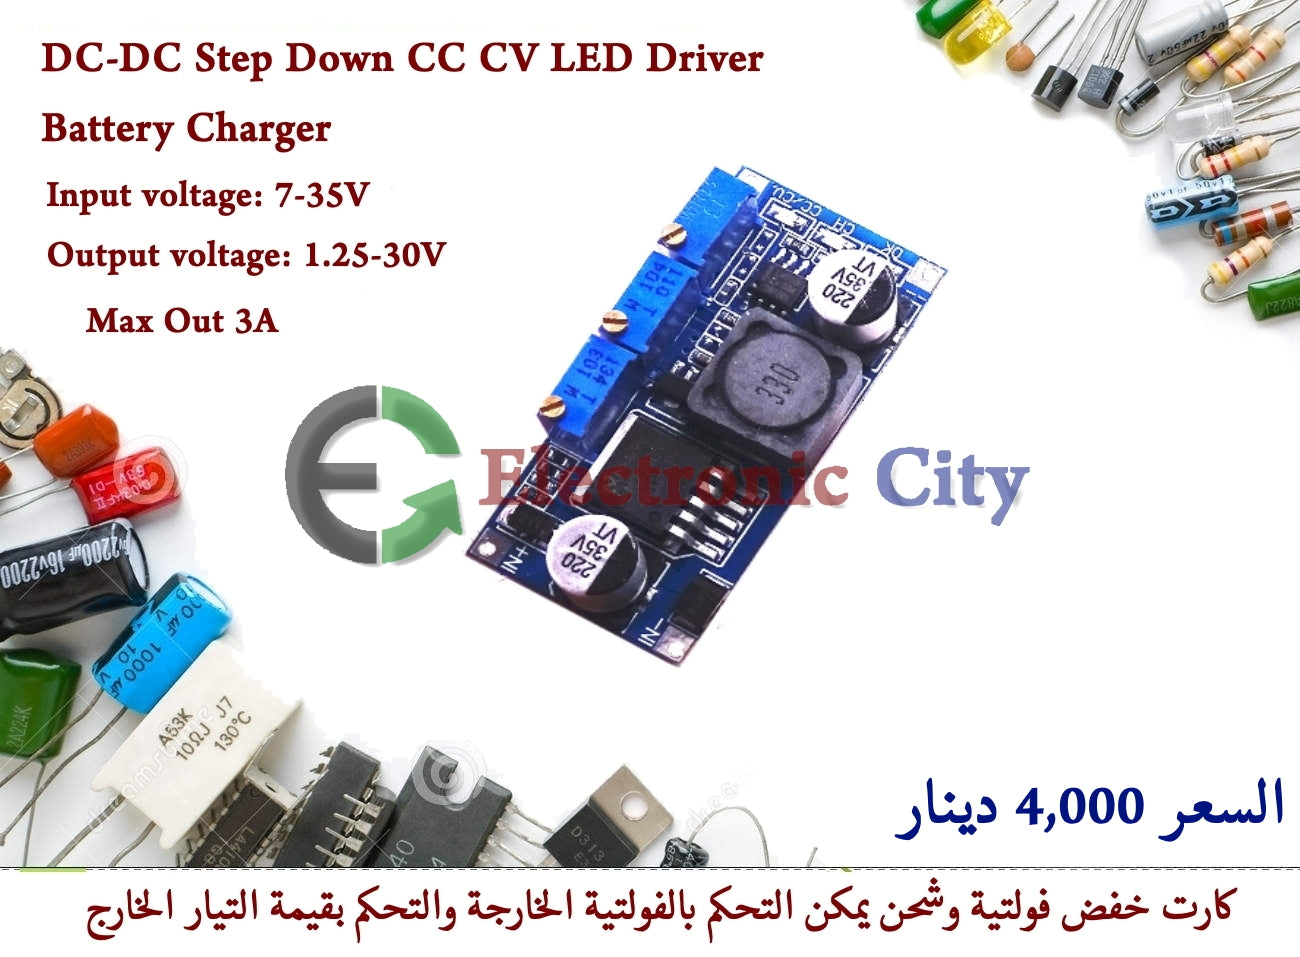 Step Down CC CV 3A LED Driver Battery Charger #G8 010059